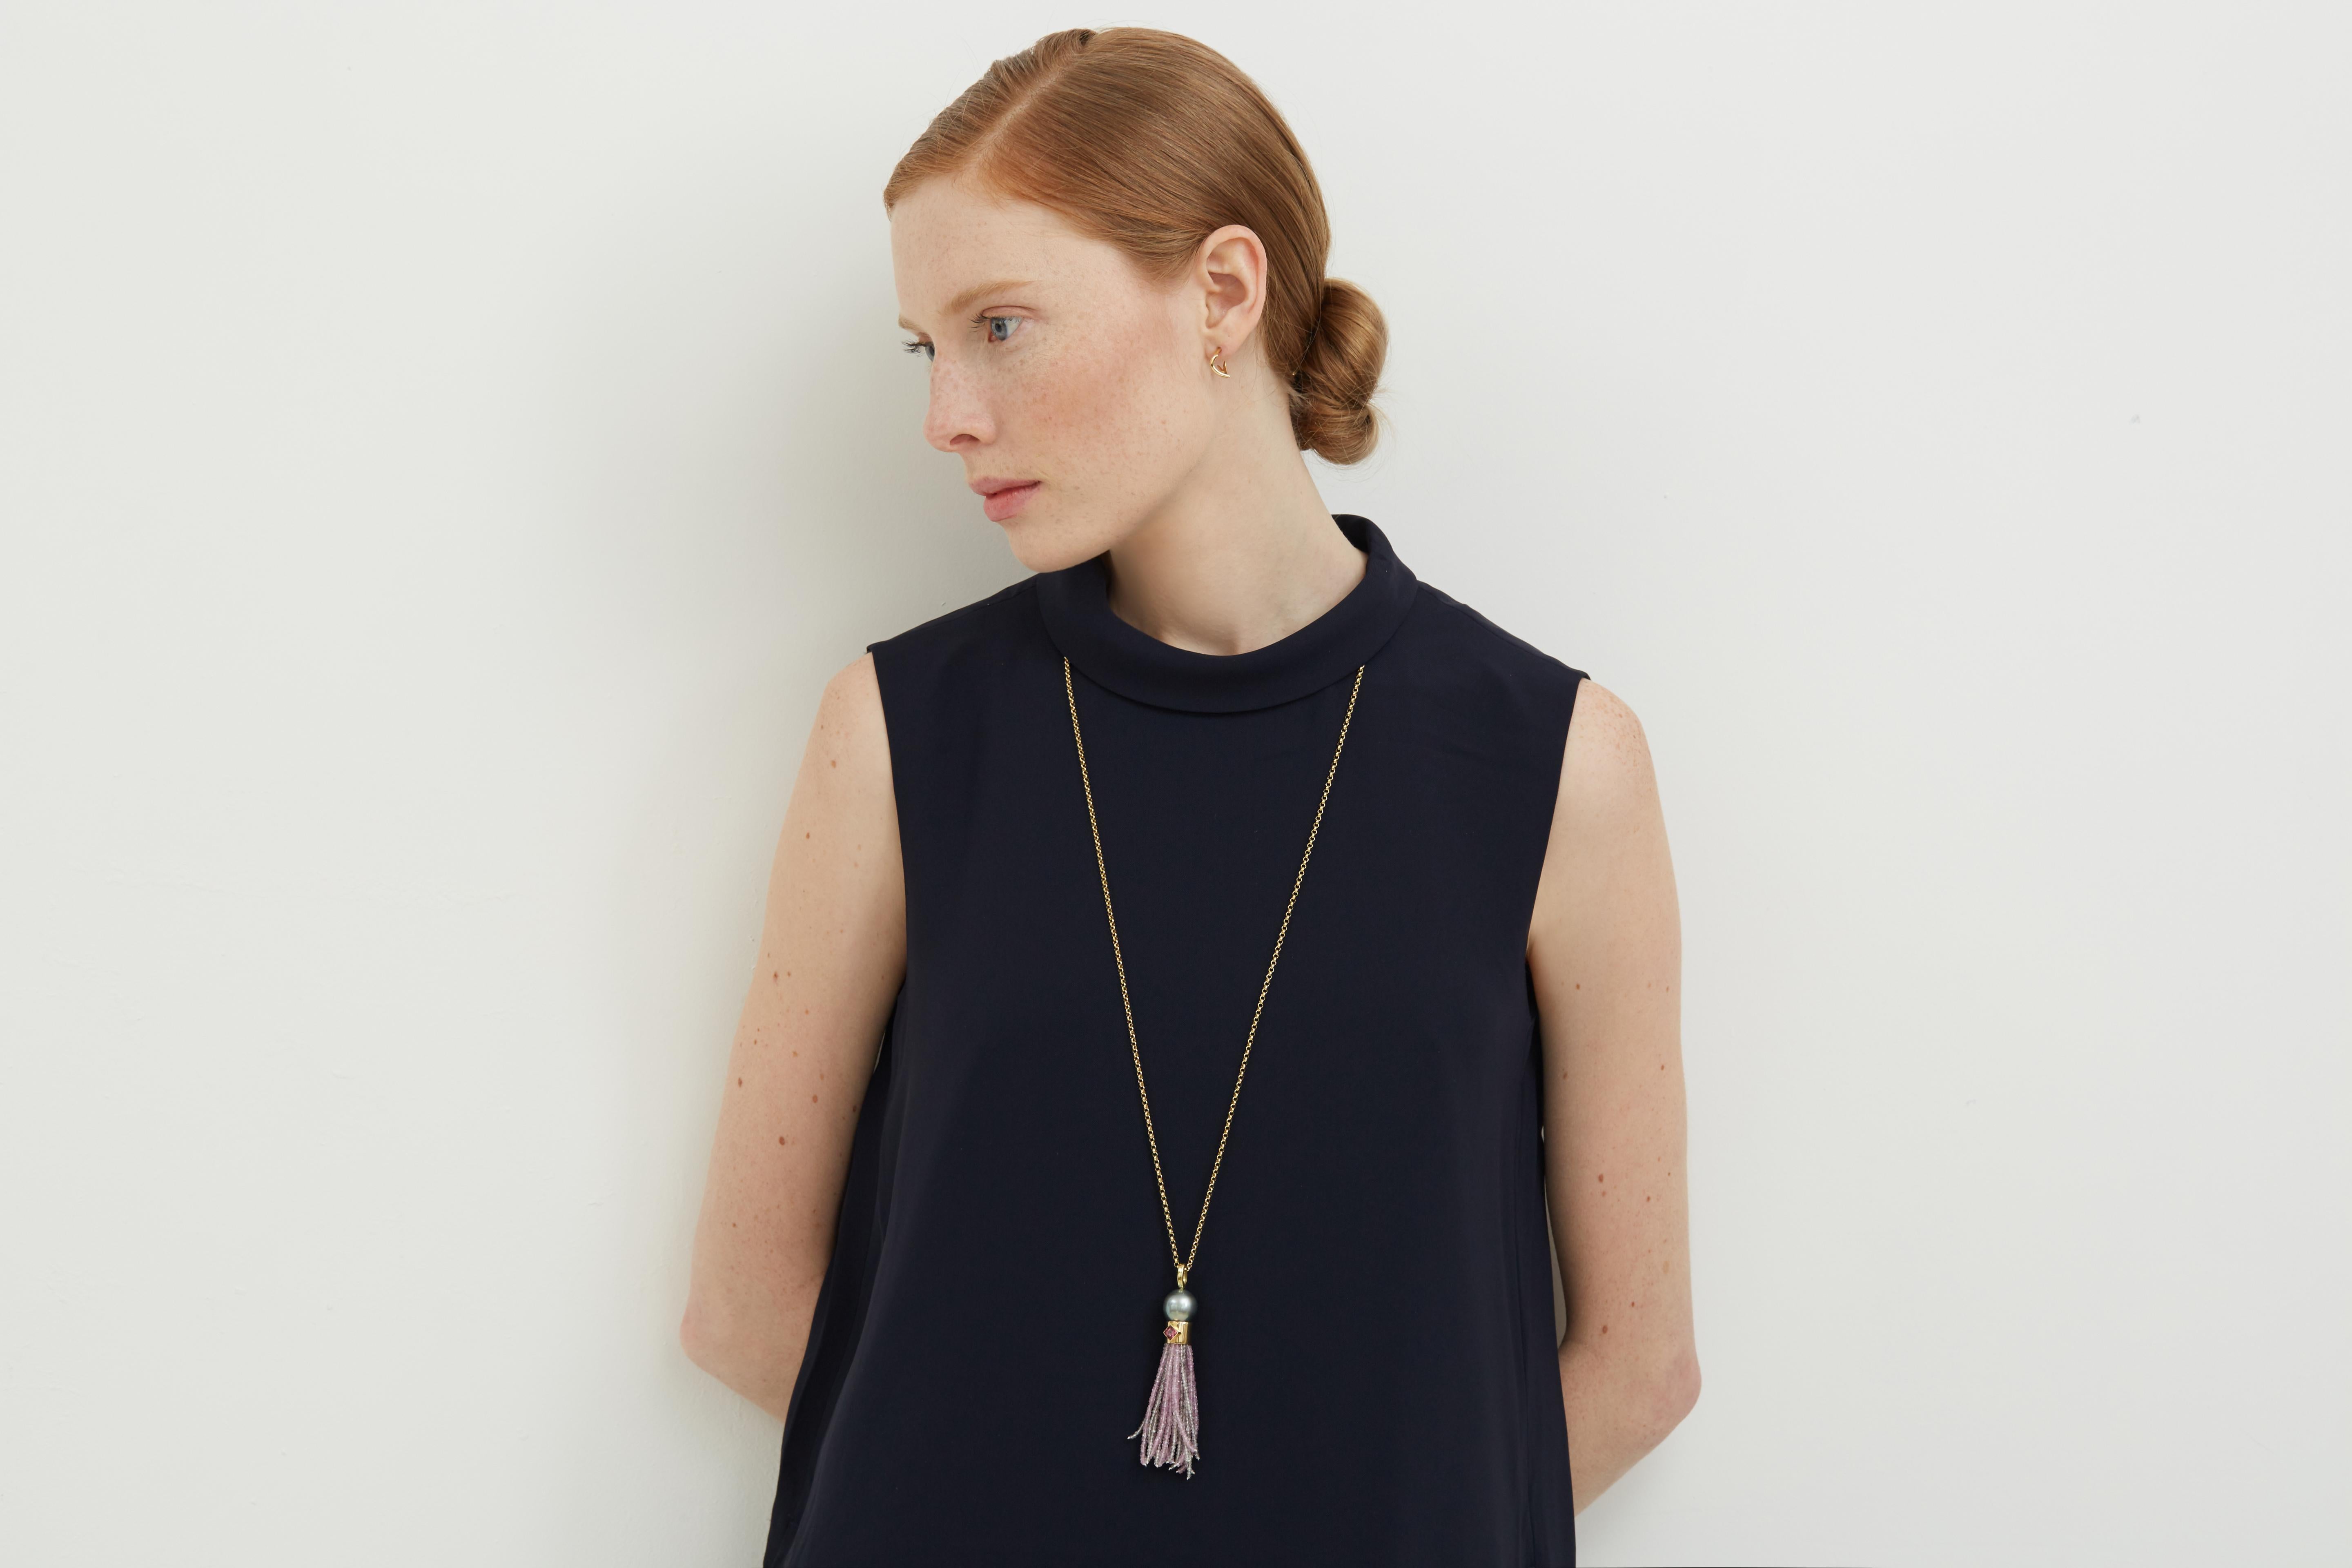 1920's inspired Tassel Necklace in 18 carat gold with a Tahitian Pearl, Diamonds and Green Sapphire beads. A statement piece that can be worn casually and formally and suitable for all ages. Joining the Sapphire beads are thin gold threads which add